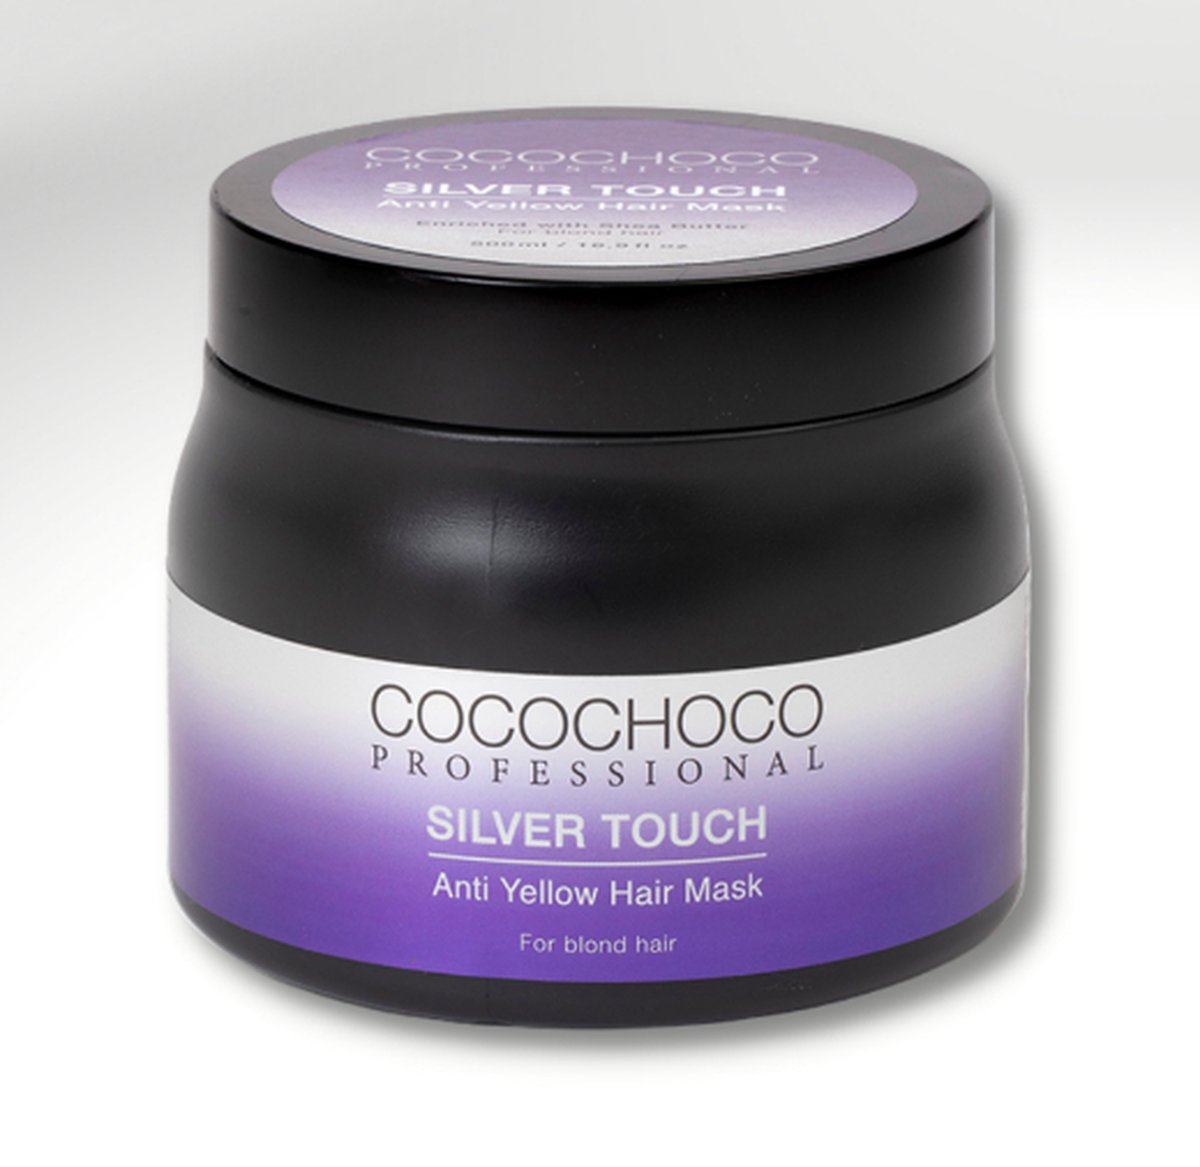 Cocochoco Silver touch Anti yellow hair mask